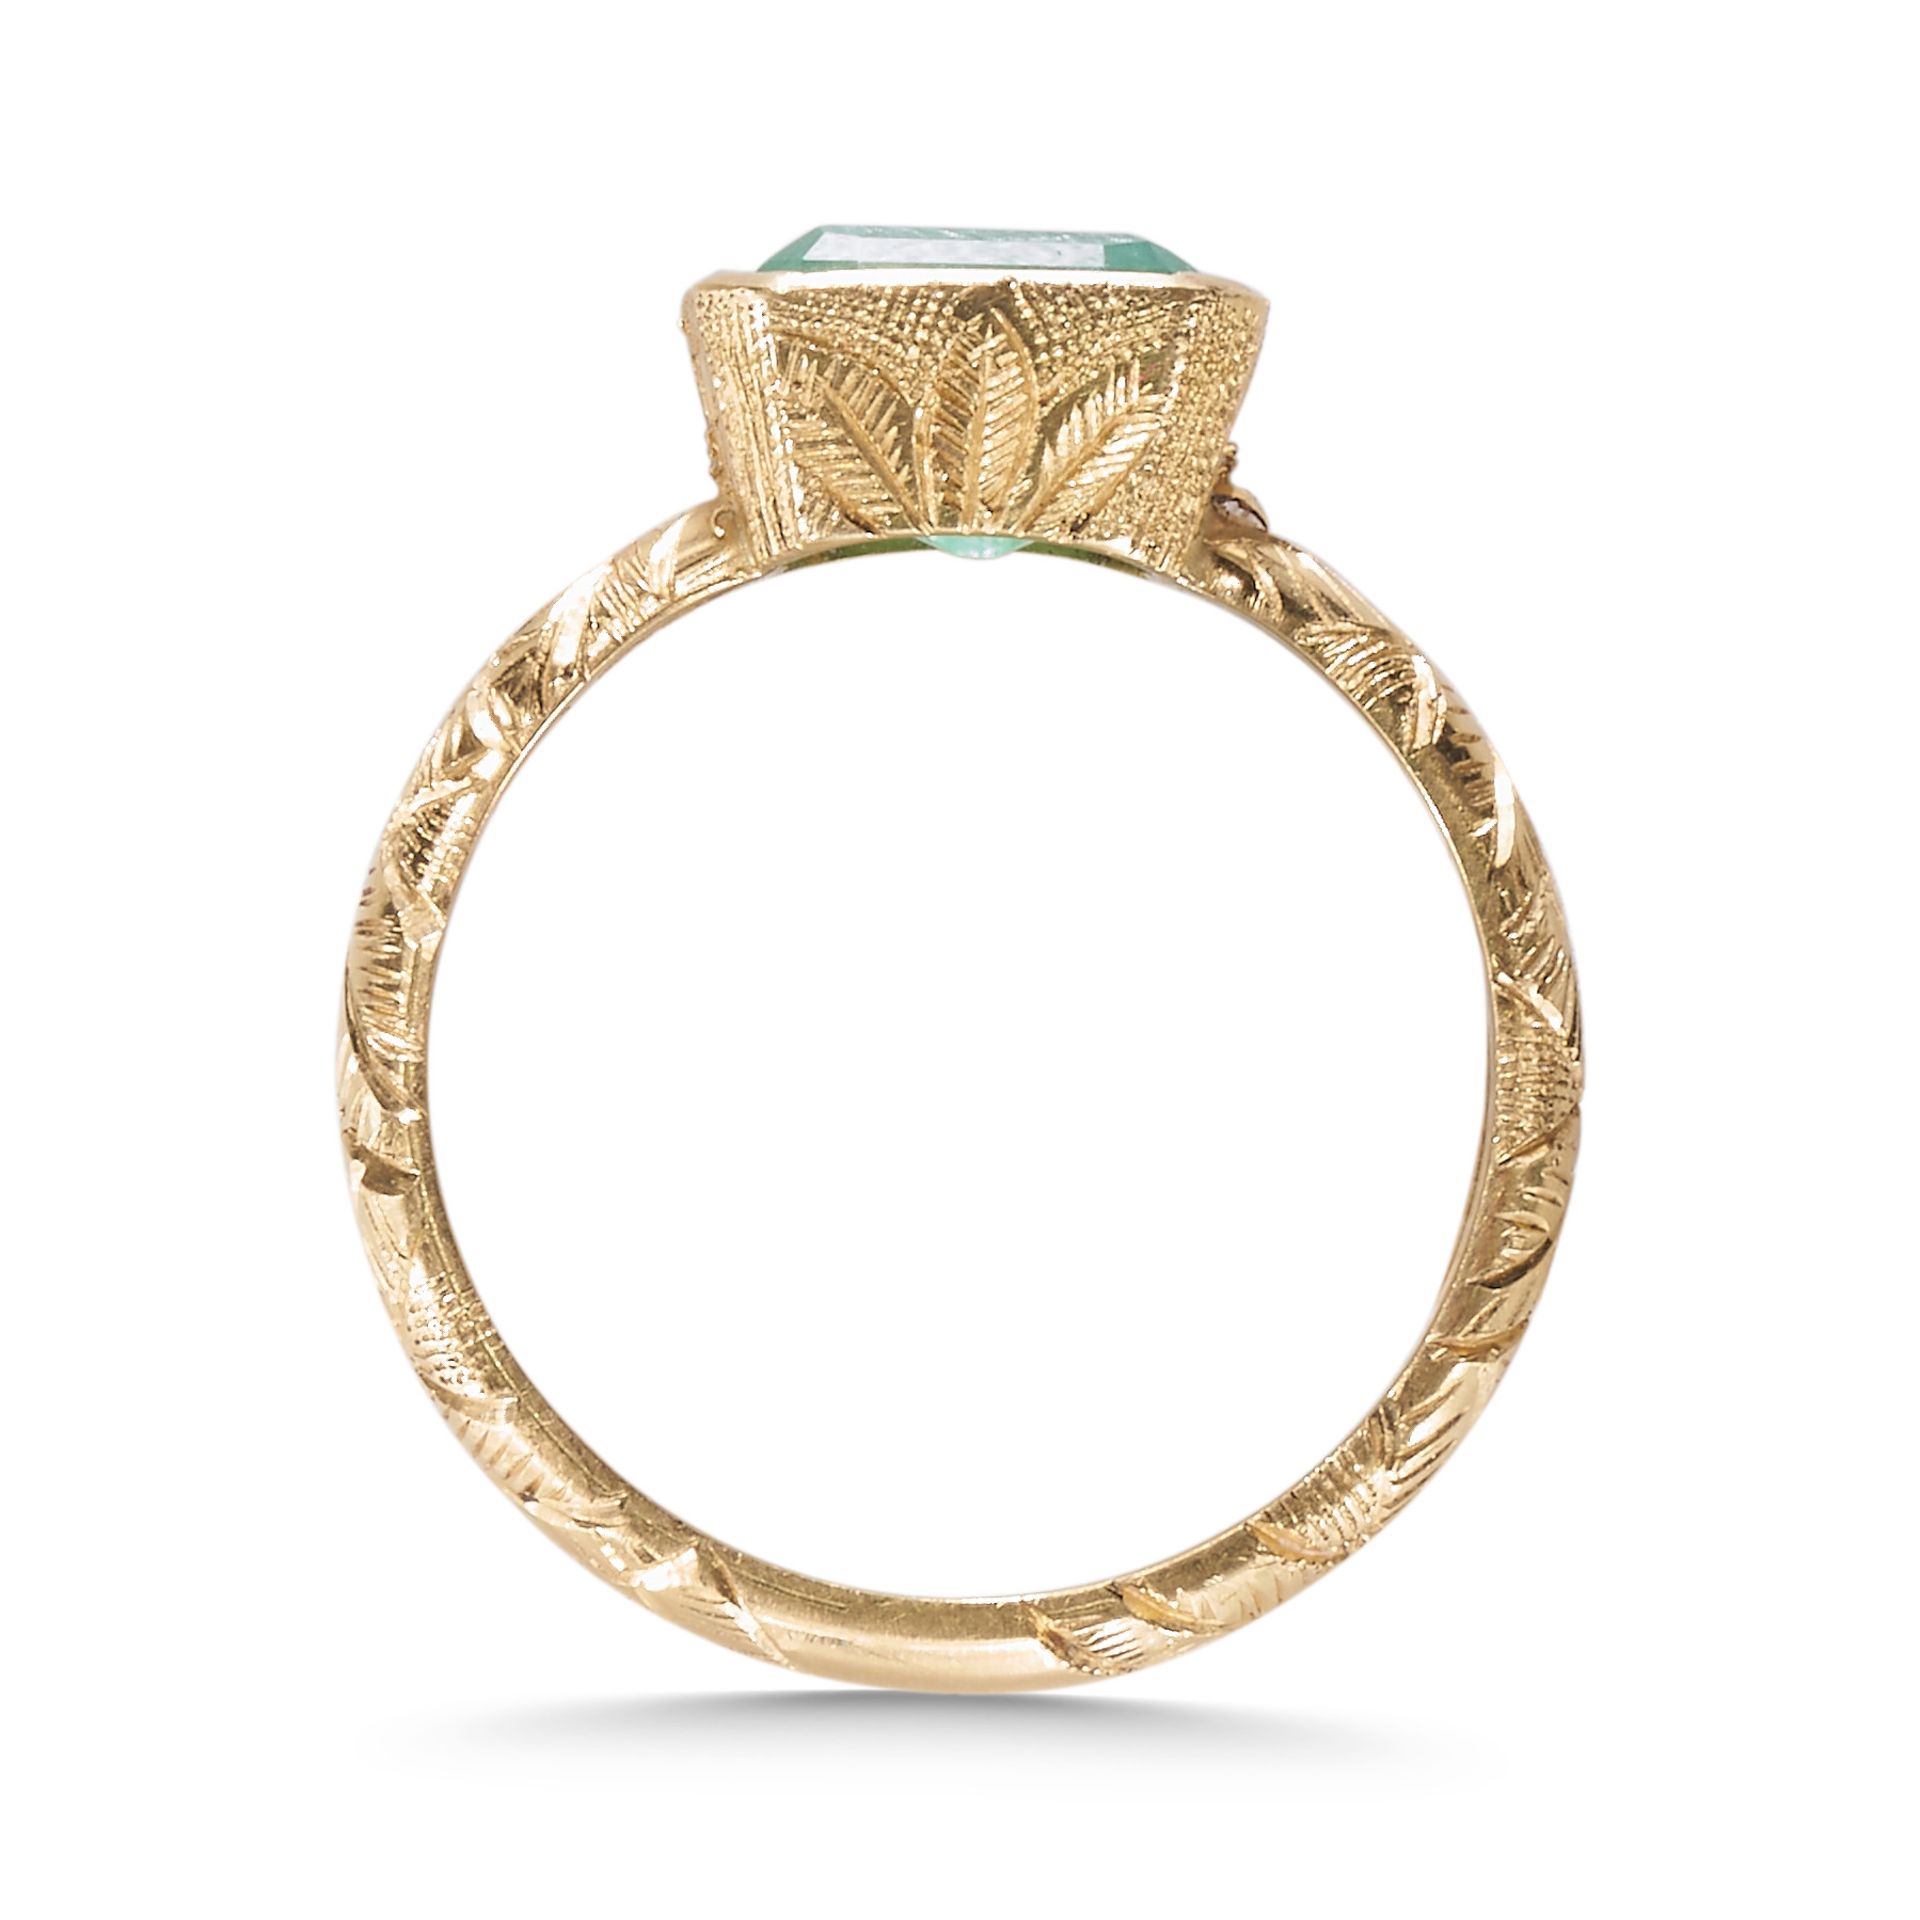 AN EMERALD, SET IN 18CT YELLOW GOLD RING. - Image 2 of 2